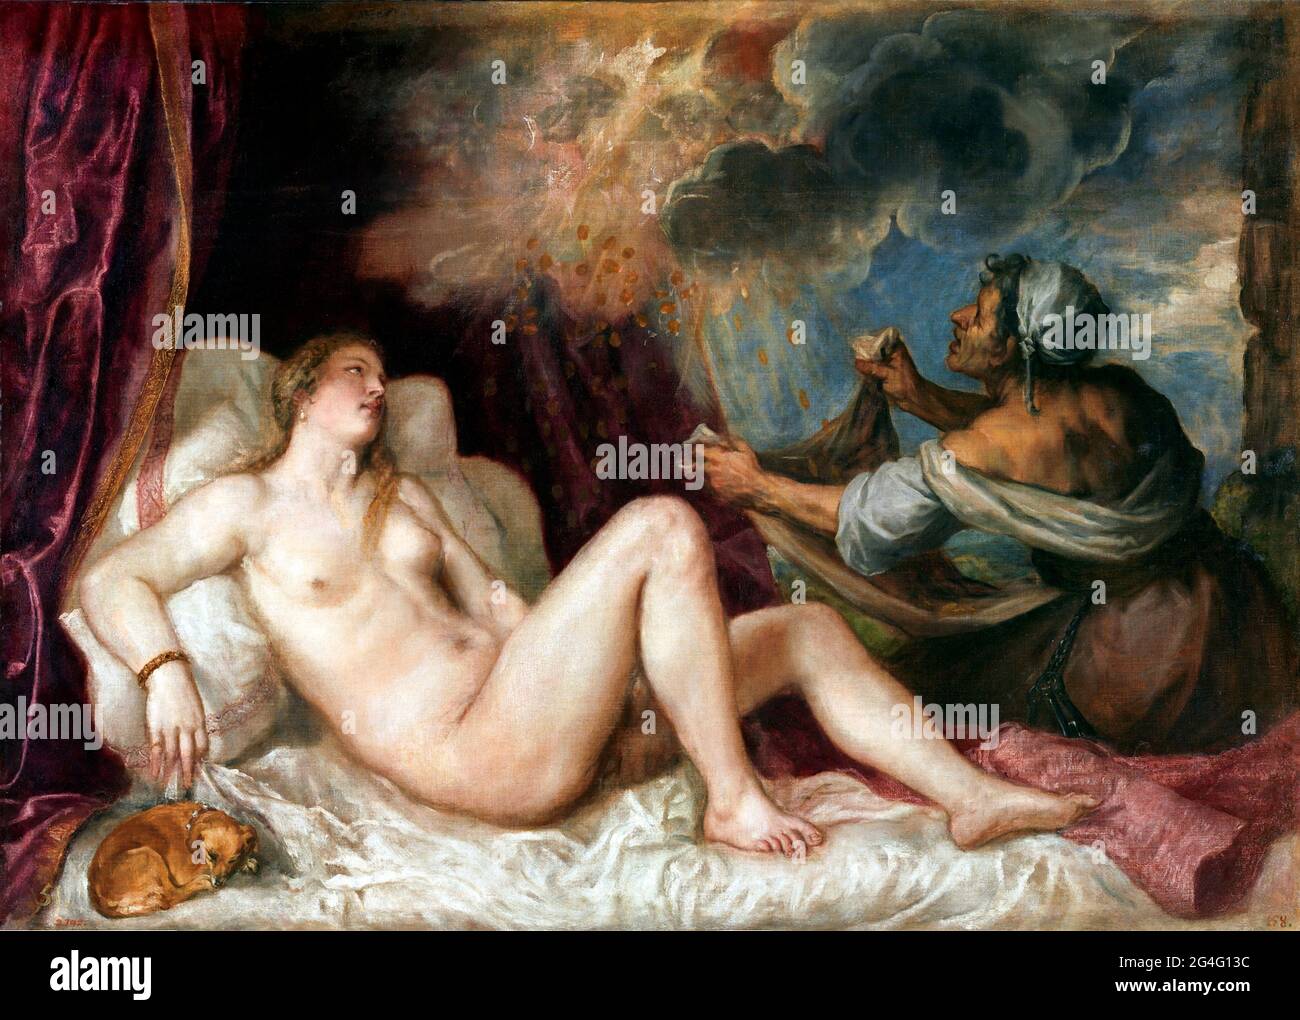 Titian. Danaë and the Shower of Gold by Tiziano Vecellio (Titian - 1490-1576), oil on canvas, c.1560-65 Stock Photo